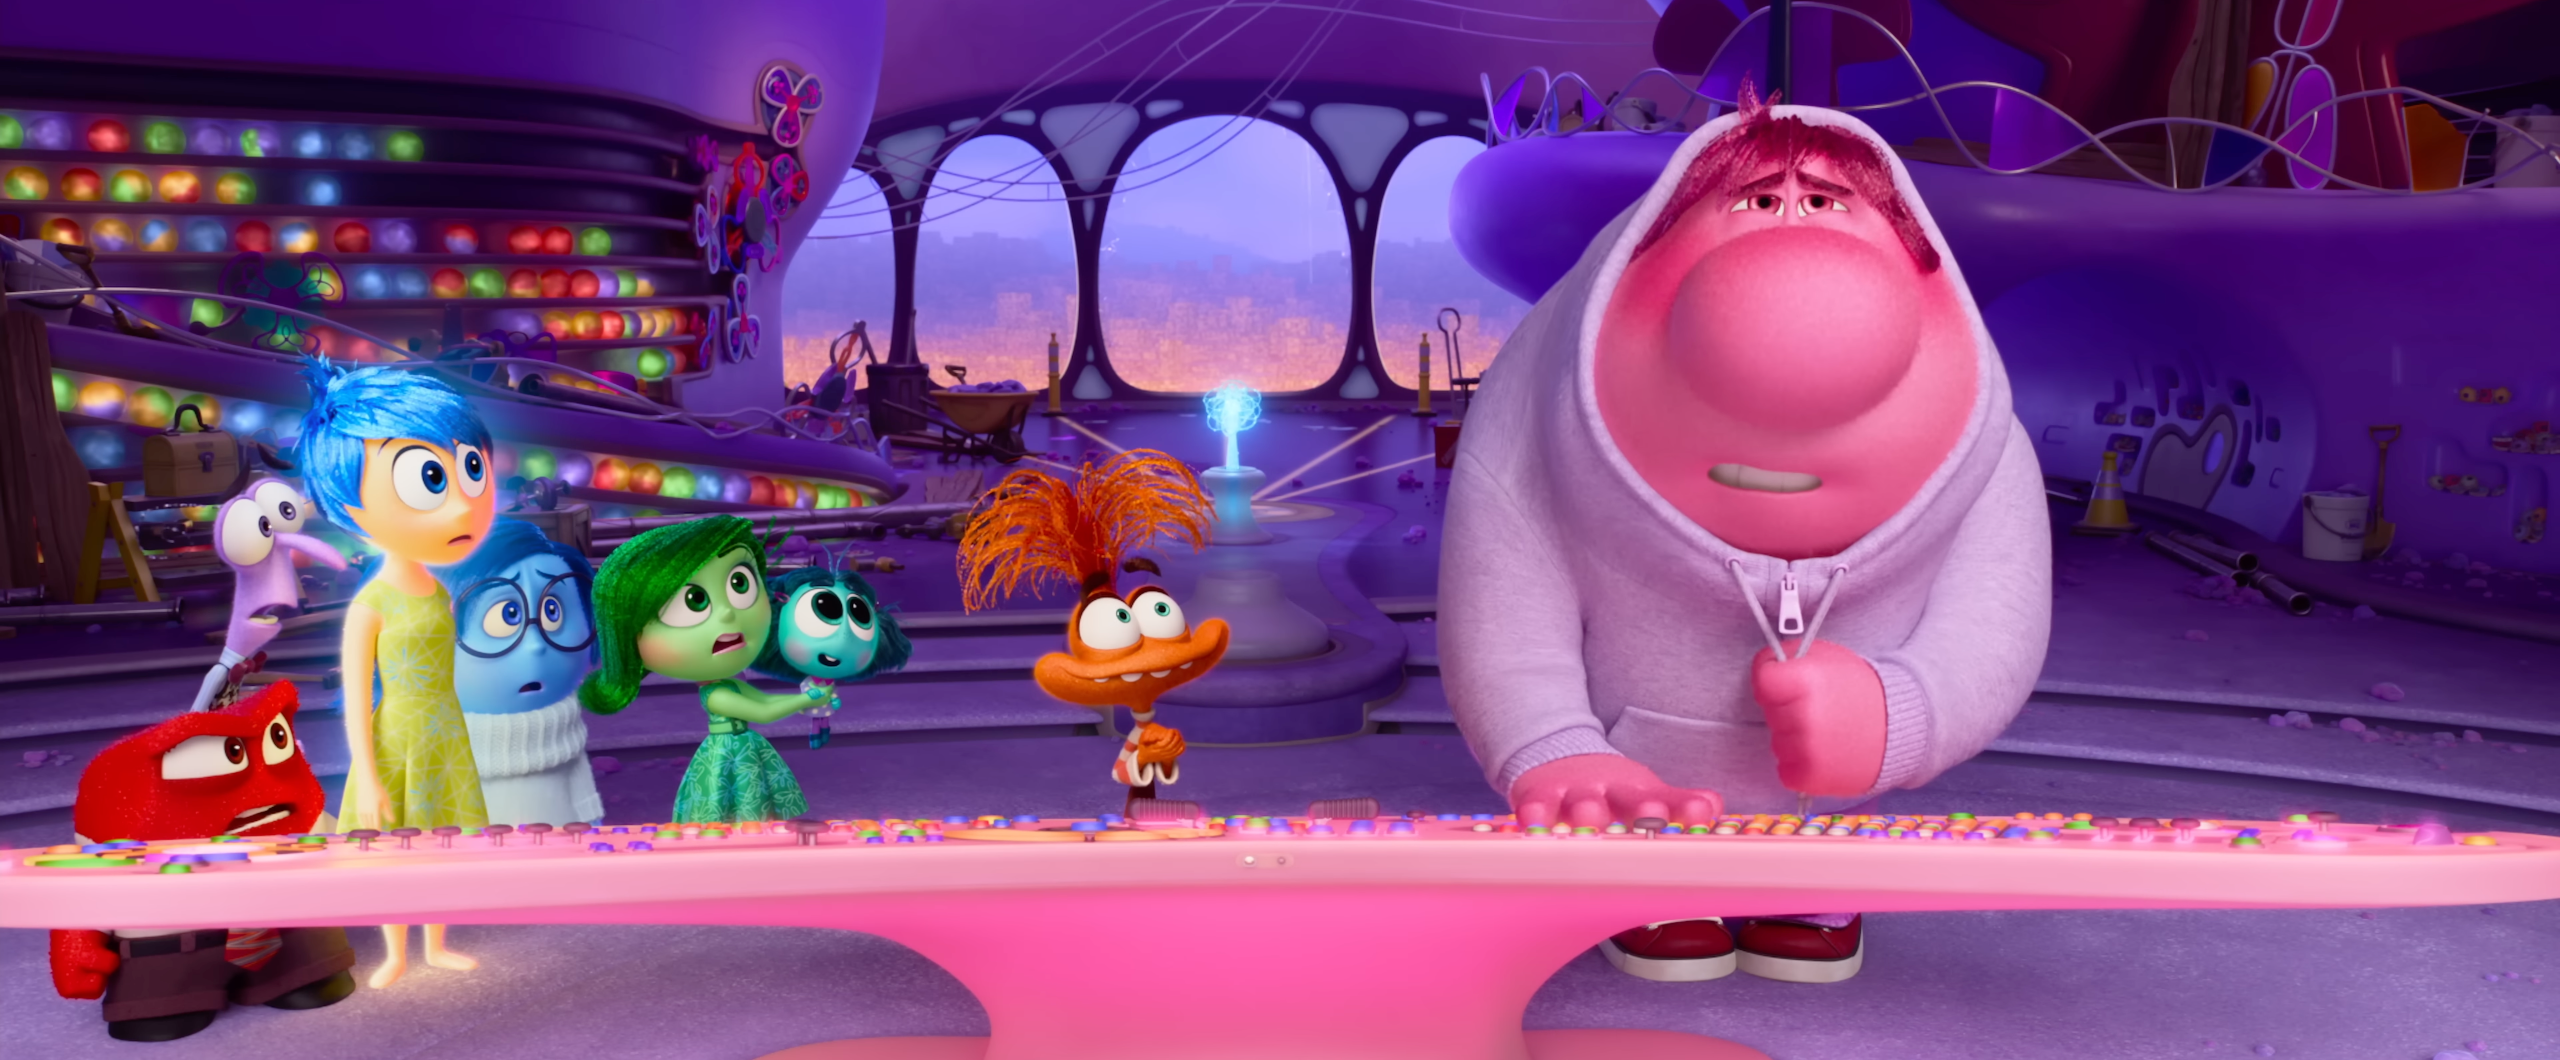 Inside Out 2 Introduces Anxiety